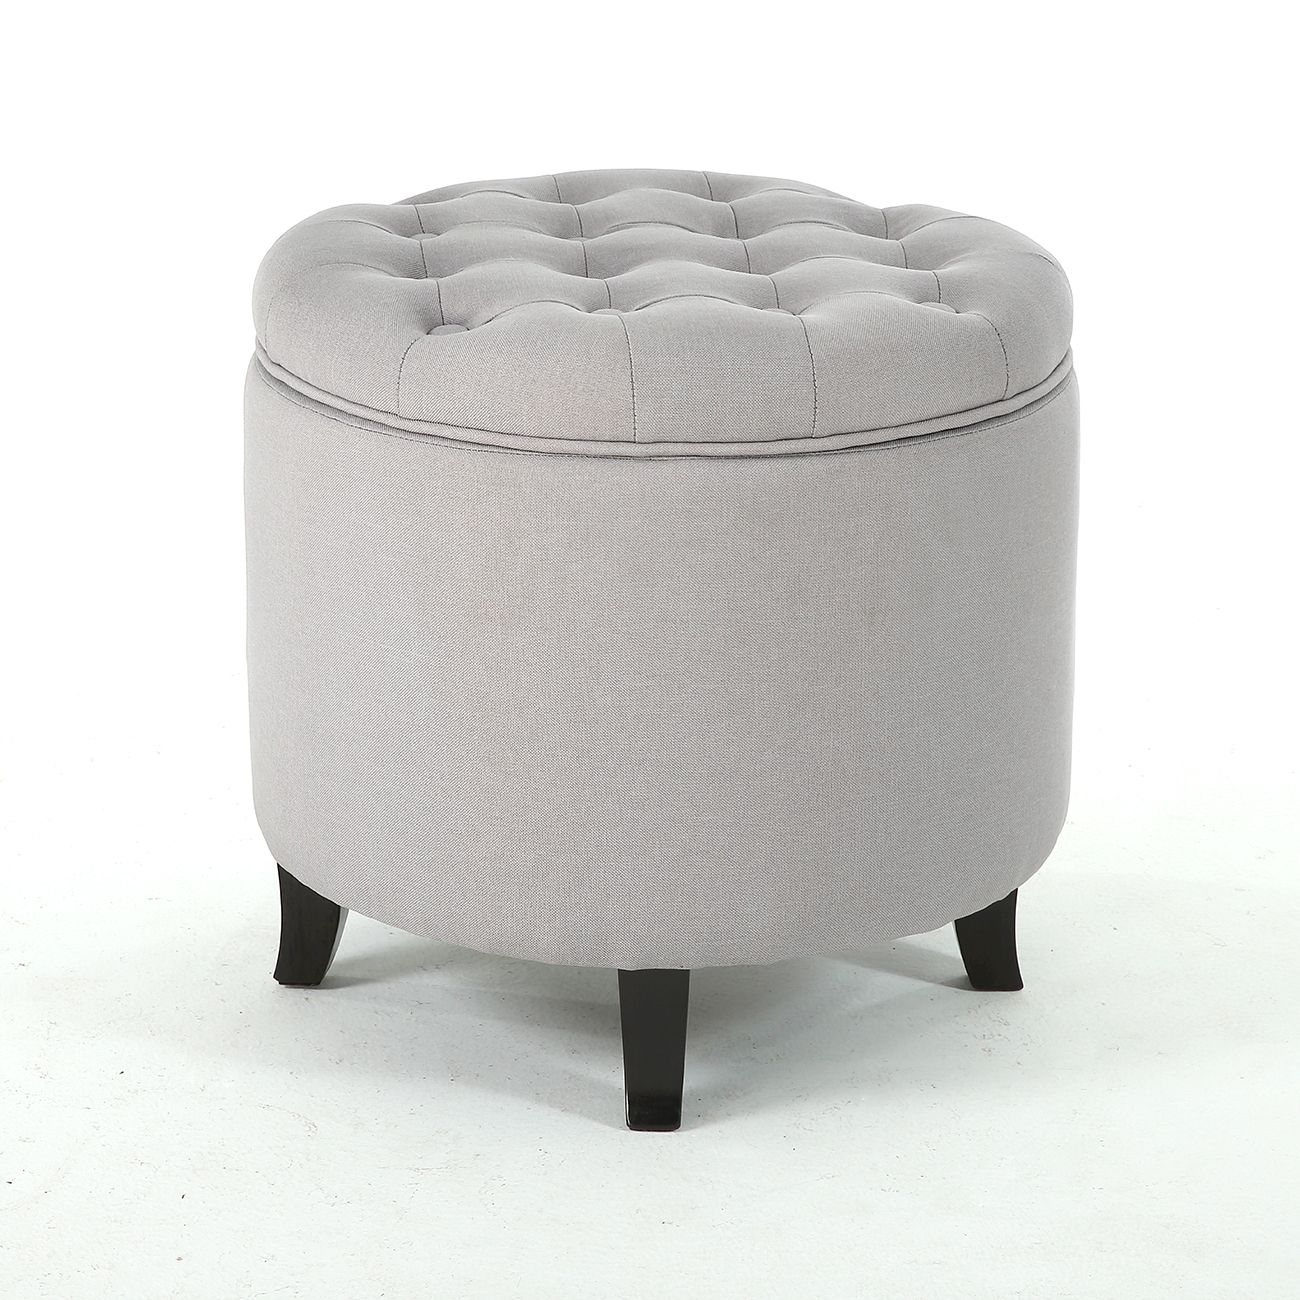 Classic Storage Ottoman Seat Nailhead Trim Large Round Tufted Table Pertaining To Round Gray Faux Leather Ottomans With Pull Tab (View 11 of 19)